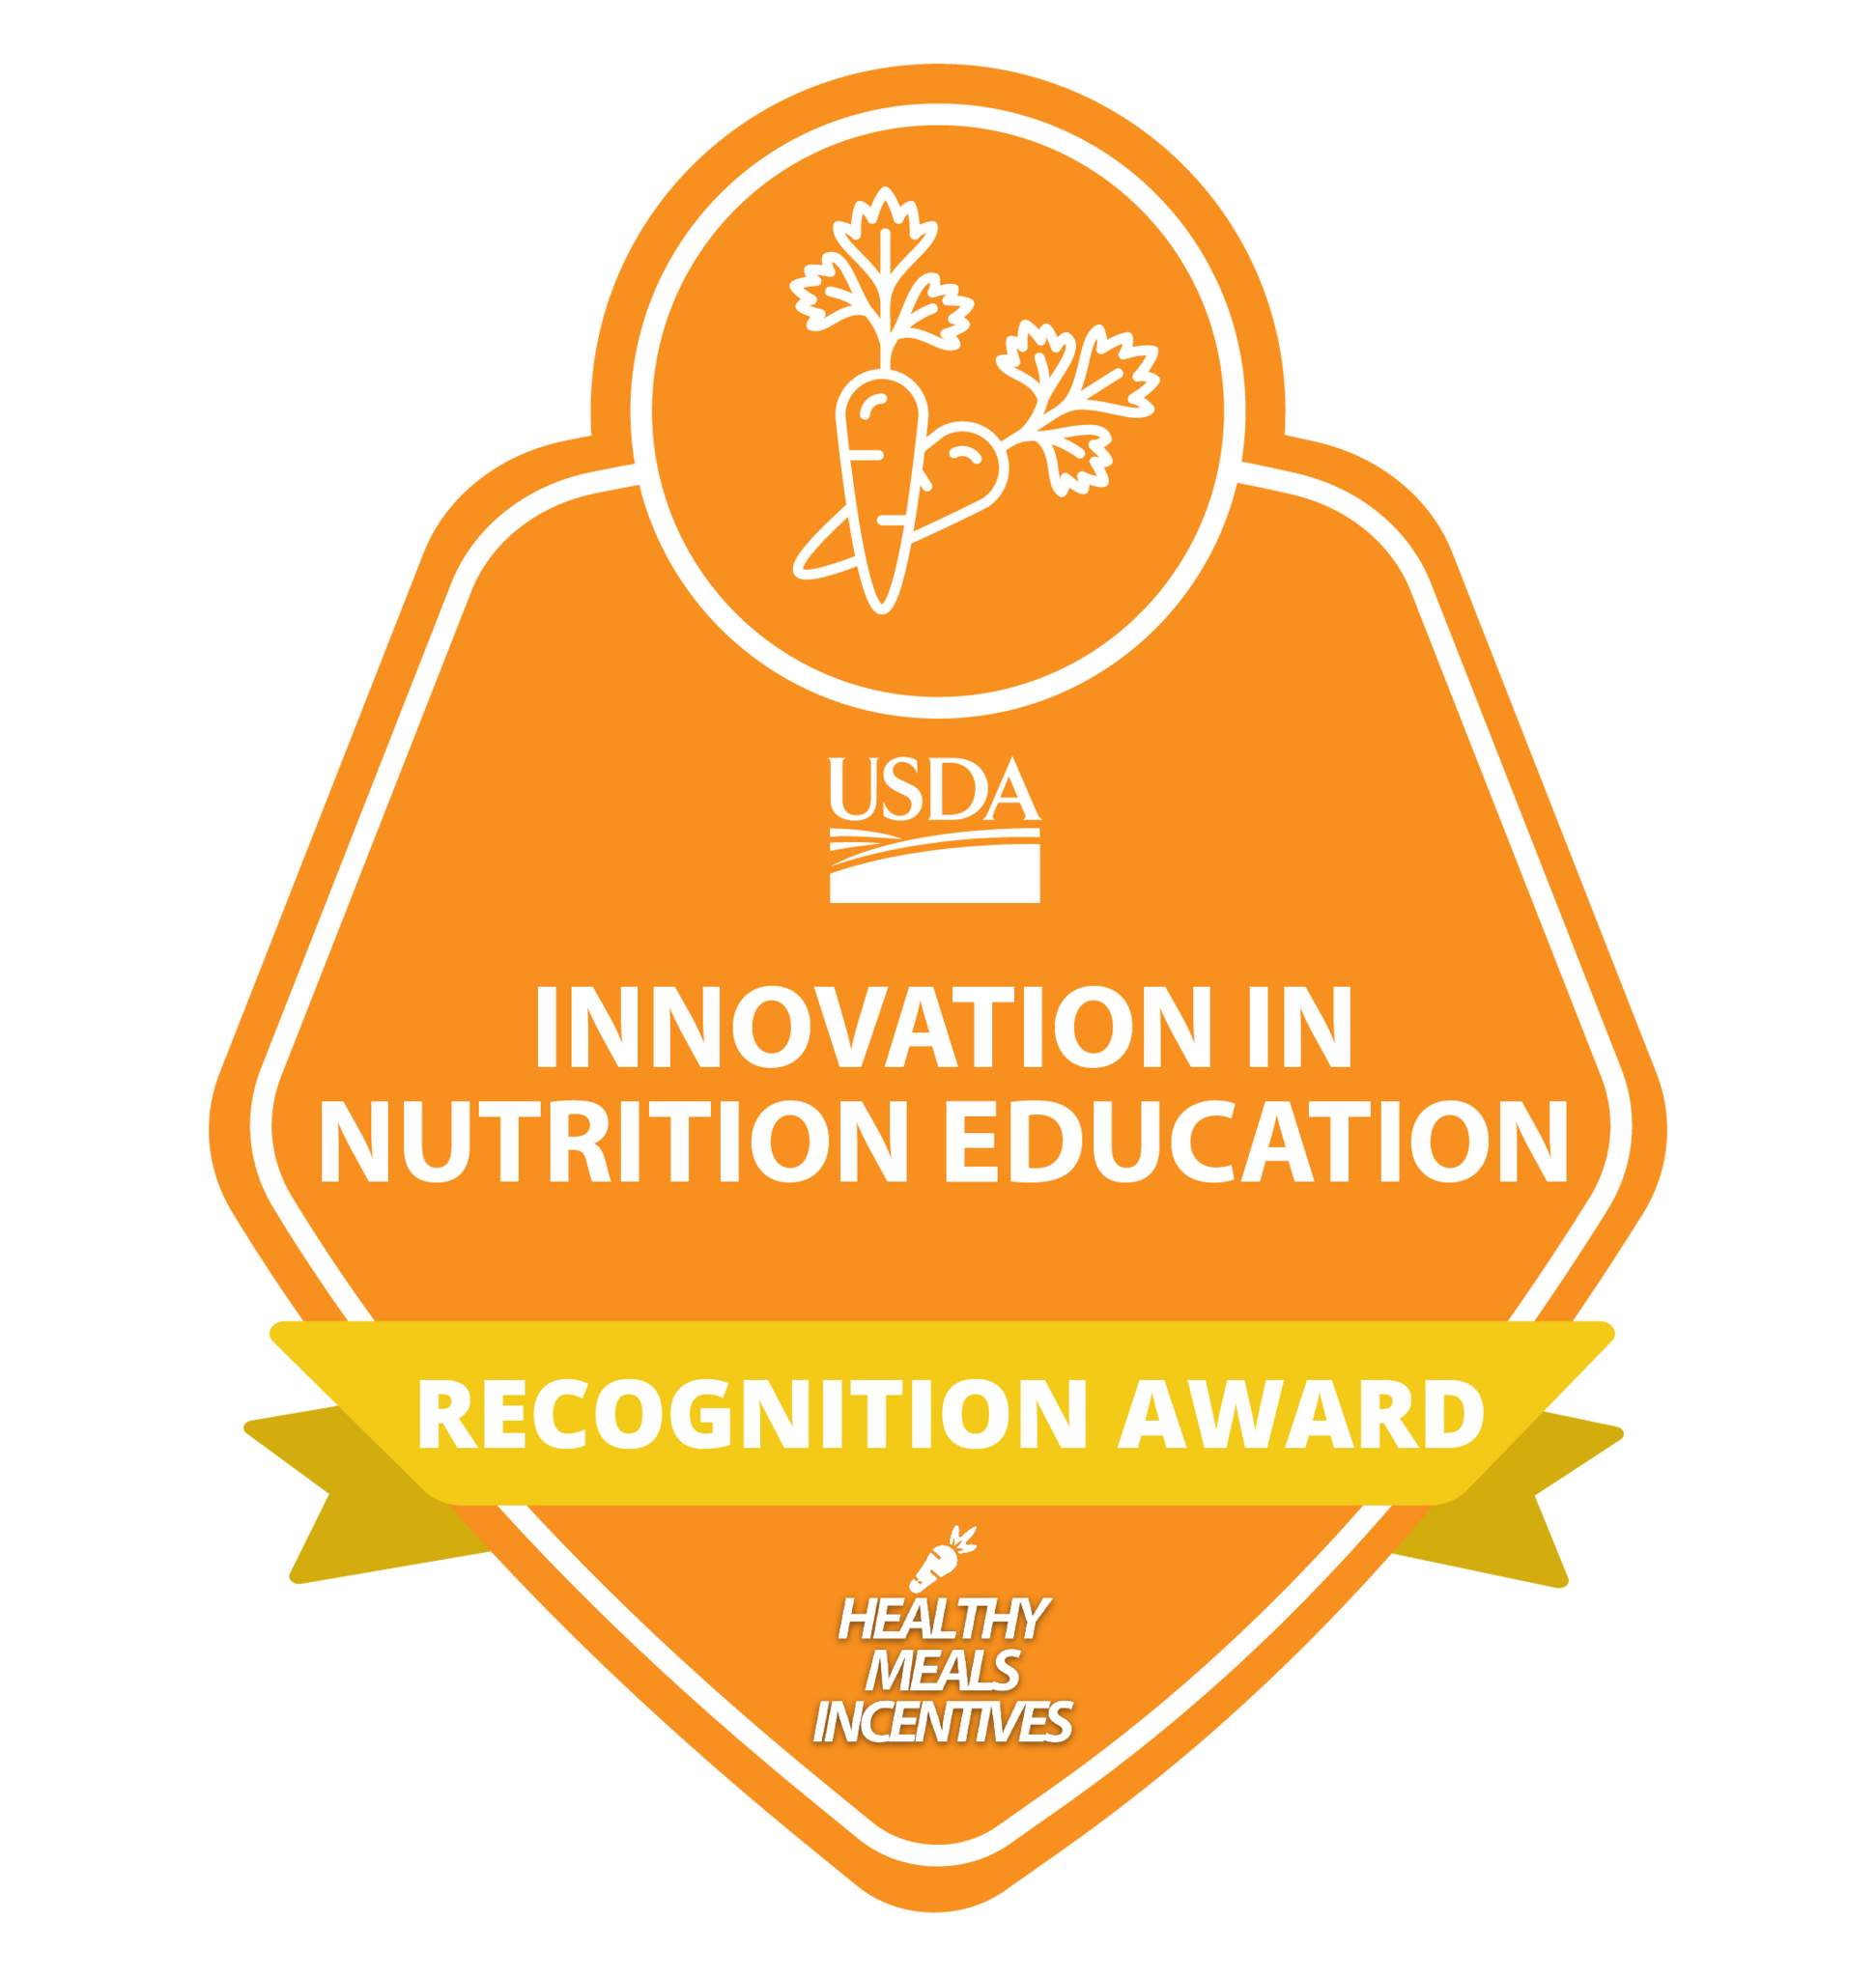 Great news! We’ve received a Healthy Meals Incentives (HMI) Recognition Award from Action for Healthy Kids and USDA for our innovative strategies that provide nutritious school meals. We’re very proud of our staff who have been working hard to earn this recognition! Learn more about the HMI Recognition Awards at https://healthymealsincentives.org/recognition-awards/.